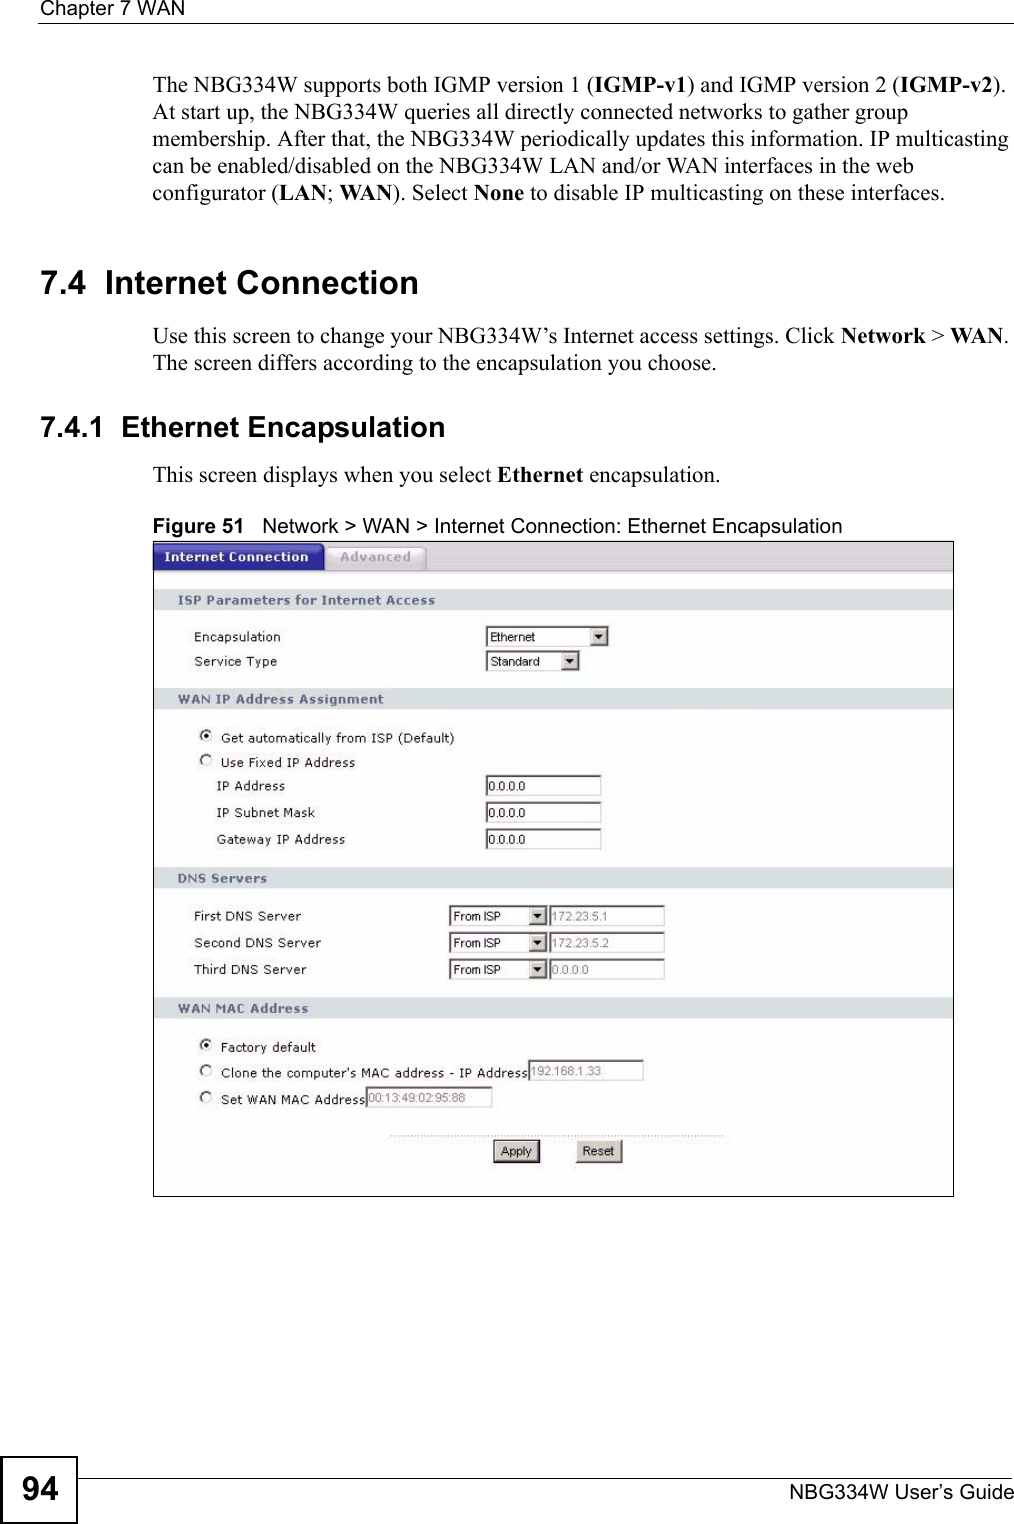 Chapter 7 WANNBG334W User’s Guide94The NBG334W supports both IGMP version 1 (IGMP-v1) and IGMP version 2 (IGMP-v2). At start up, the NBG334W queries all directly connected networks to gather group membership. After that, the NBG334W periodically updates this information. IP multicasting can be enabled/disabled on the NBG334W LAN and/or WAN interfaces in the web configurator (LAN; WA N). Select None to disable IP multicasting on these interfaces.7.4  Internet ConnectionUse this screen to change your NBG334W’s Internet access settings. Click Network &gt; WA N . The screen differs according to the encapsulation you choose.7.4.1  Ethernet EncapsulationThis screen displays when you select Ethernet encapsulation.Figure 51   Network &gt; WAN &gt; Internet Connection: Ethernet Encapsulation